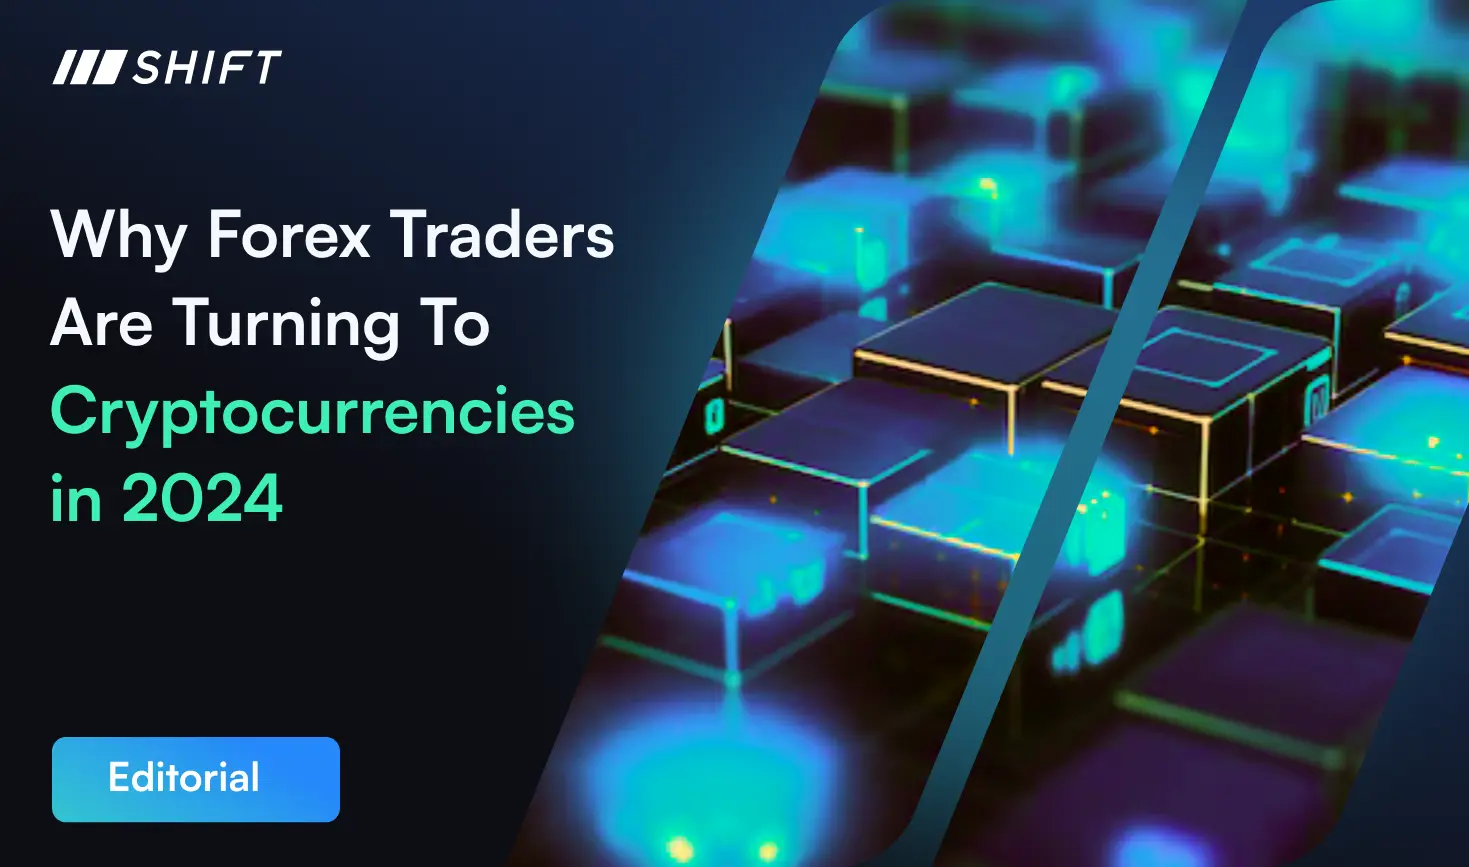 Forex traders are mass migrating to cryptocurrency trading. Learn why with Shift Markets.